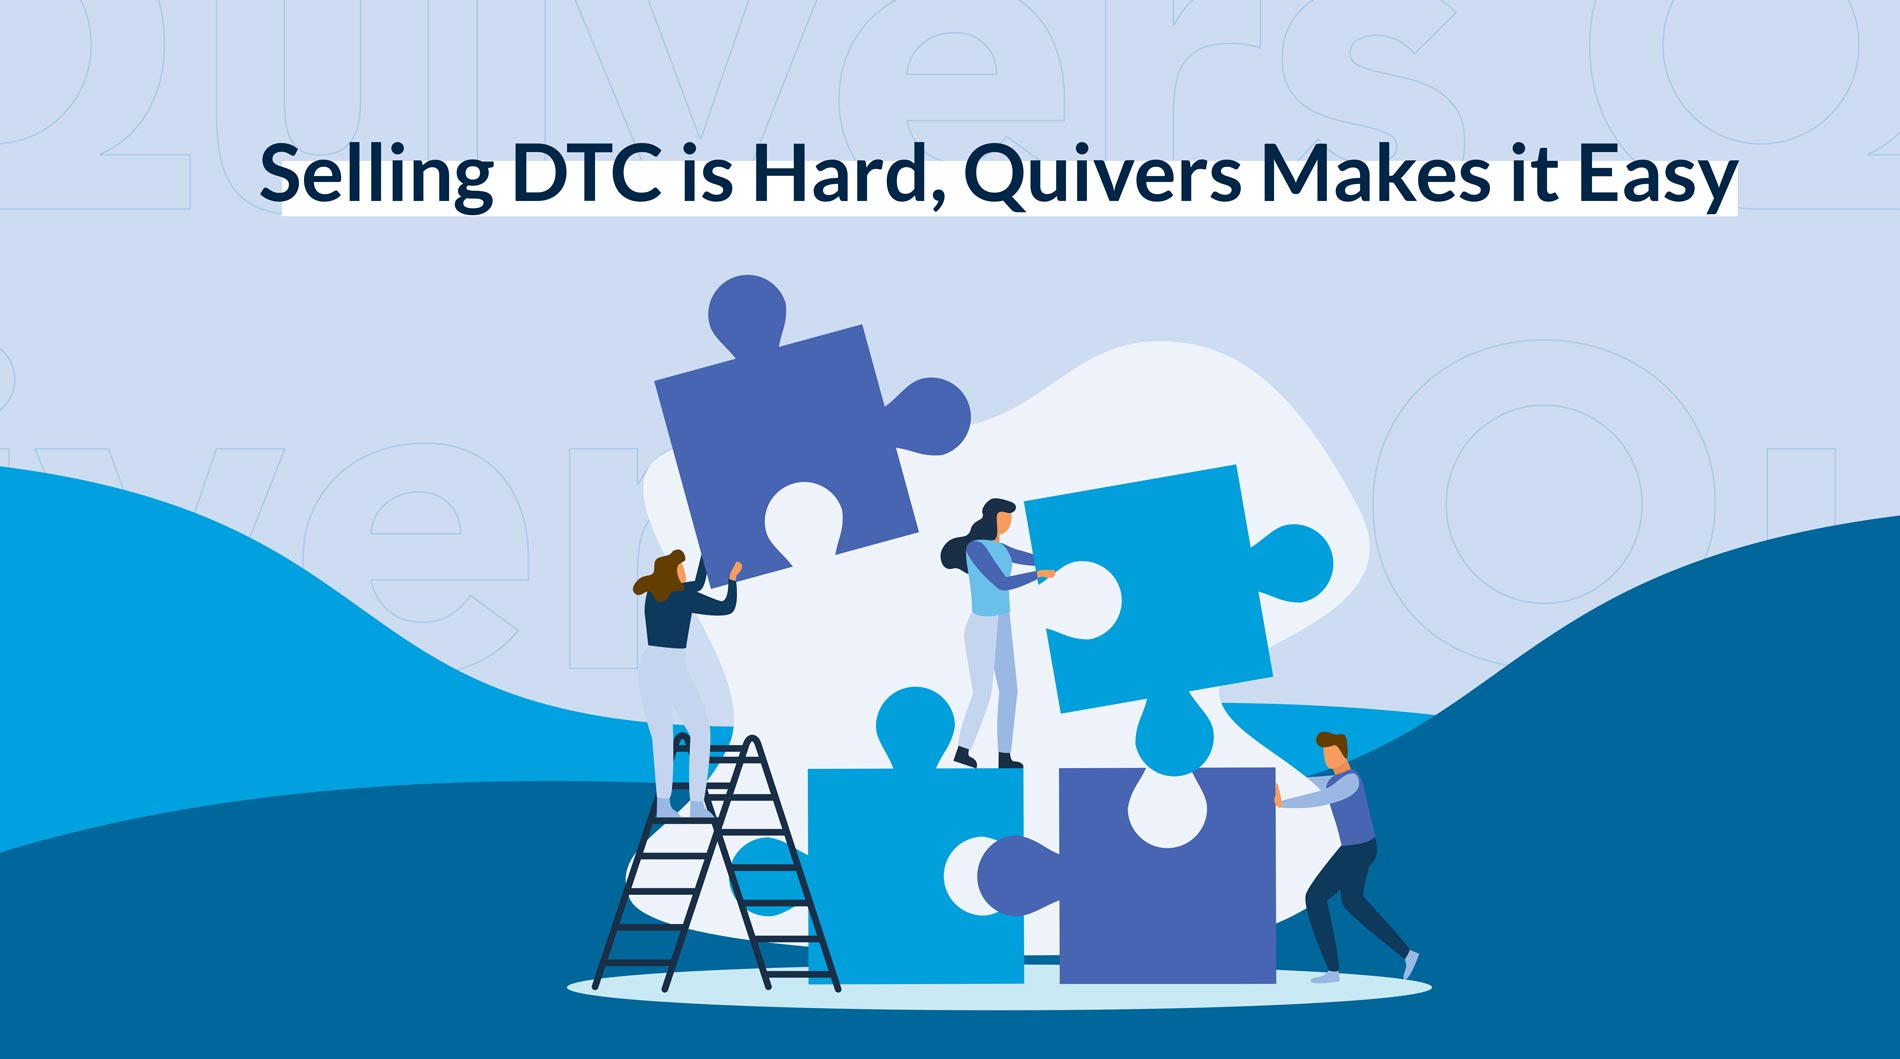 Selling DTC is Hard, Quivers Makes it Easy